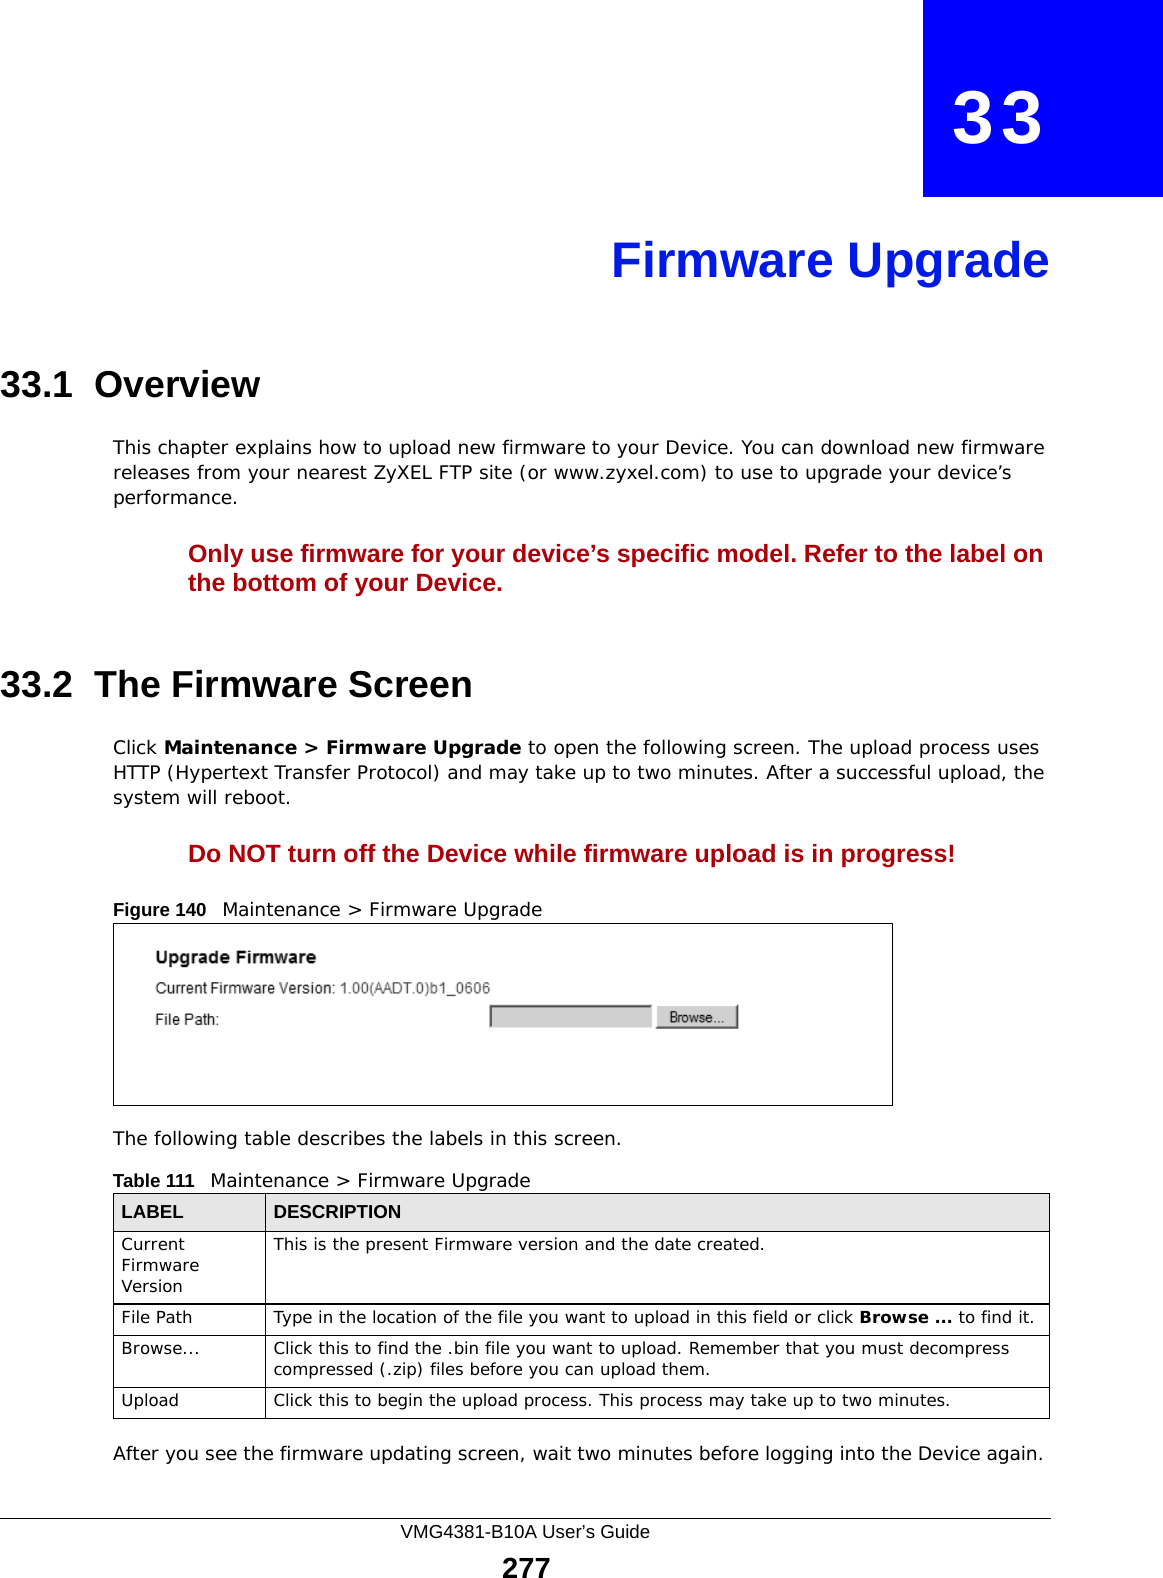 VMG4381-B10A User’s Guide277CHAPTER   33Firmware Upgrade33.1  OverviewThis chapter explains how to upload new firmware to your Device. You can download new firmware releases from your nearest ZyXEL FTP site (or www.zyxel.com) to use to upgrade your device’s performance.Only use firmware for your device’s specific model. Refer to the label on the bottom of your Device.33.2  The Firmware ScreenClick Maintenance &gt; Firmware Upgrade to open the following screen. The upload process uses HTTP (Hypertext Transfer Protocol) and may take up to two minutes. After a successful upload, the system will reboot. Do NOT turn off the Device while firmware upload is in progress!Figure 140   Maintenance &gt; Firmware UpgradeThe following table describes the labels in this screen. After you see the firmware updating screen, wait two minutes before logging into the Device again. Table 111   Maintenance &gt; Firmware UpgradeLABEL DESCRIPTIONCurrent Firmware VersionThis is the present Firmware version and the date created. File Path Type in the location of the file you want to upload in this field or click Browse ... to find it.Browse...  Click this to find the .bin file you want to upload. Remember that you must decompress compressed (.zip) files before you can upload them. Upload  Click this to begin the upload process. This process may take up to two minutes.